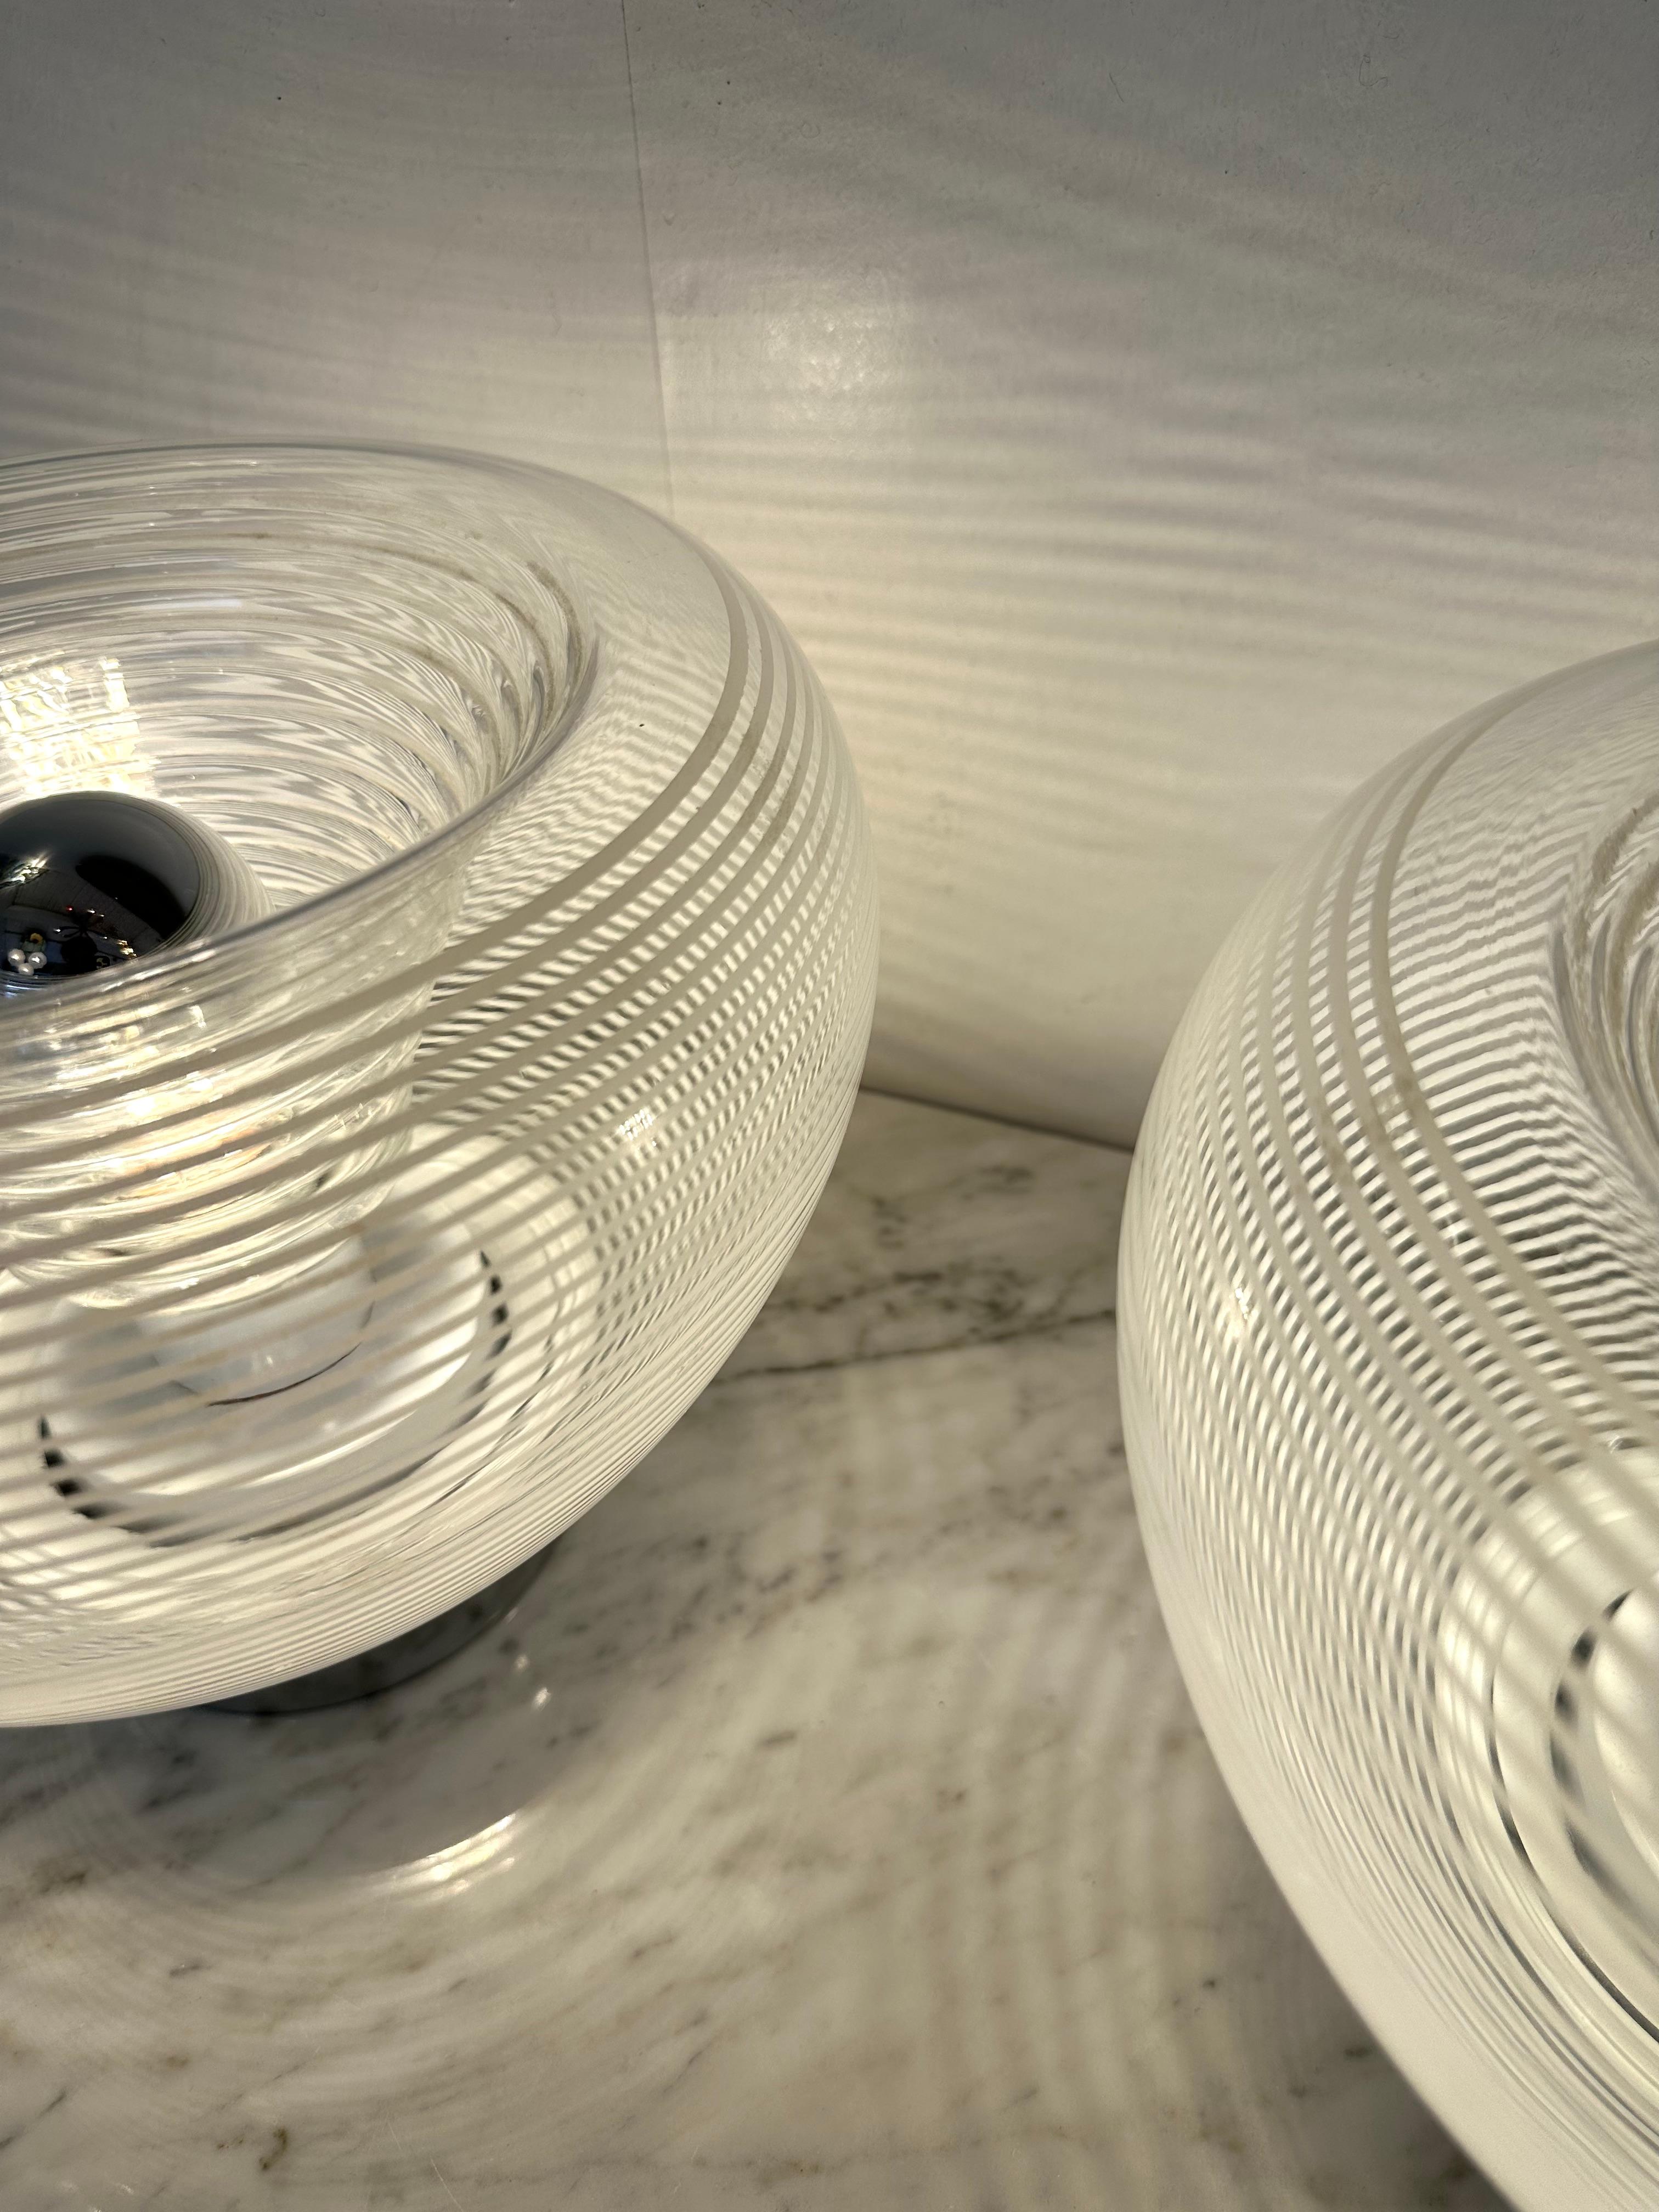 Pair of Stripe Murano Glass and Metal Chrome Lamps by VeArt, Italy, 1970s For Sale 1